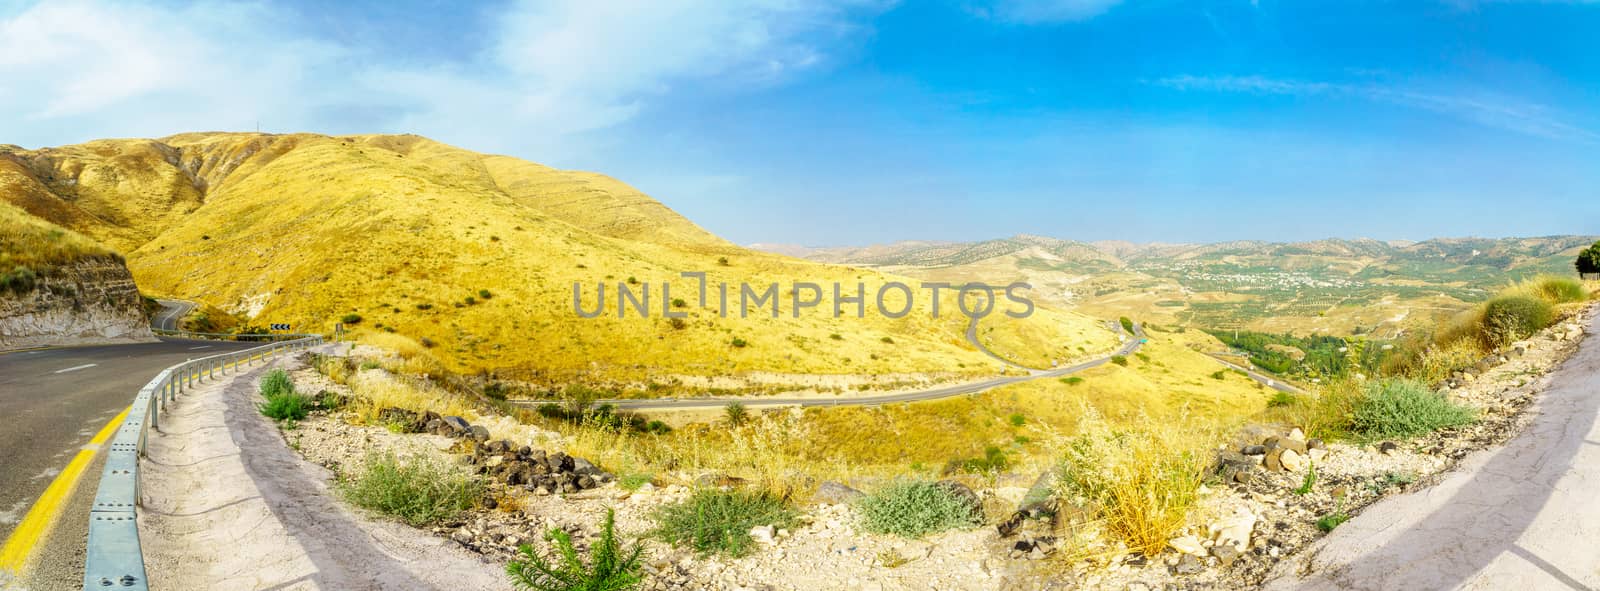 Panorama of the Golan Heights, and the Yarmouk River valley by RnDmS